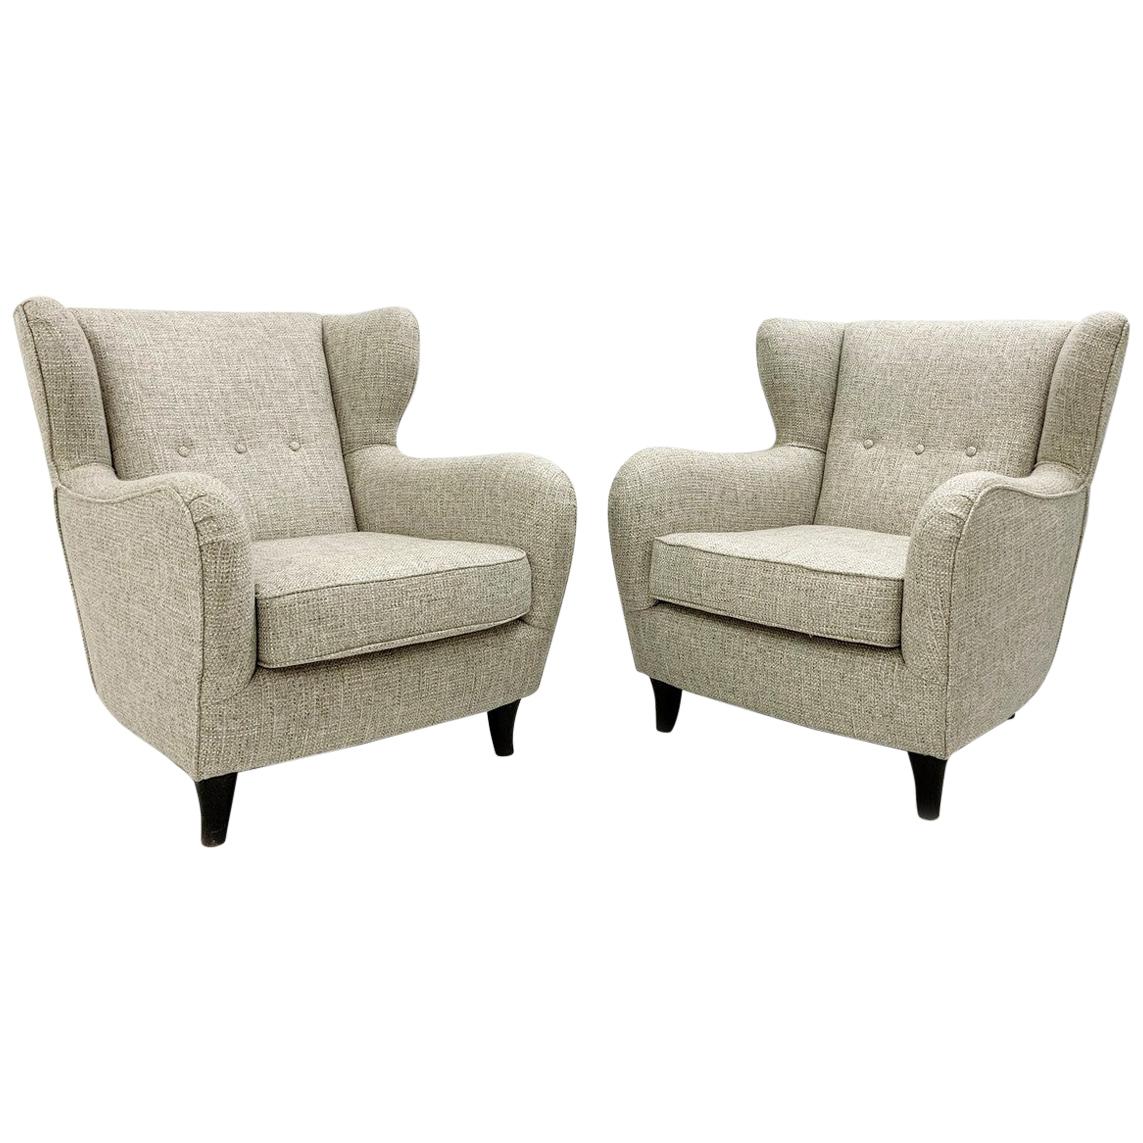 Pair of Mid-Century Modern of Italian Wingback Armchairs, New Upholstery For Sale